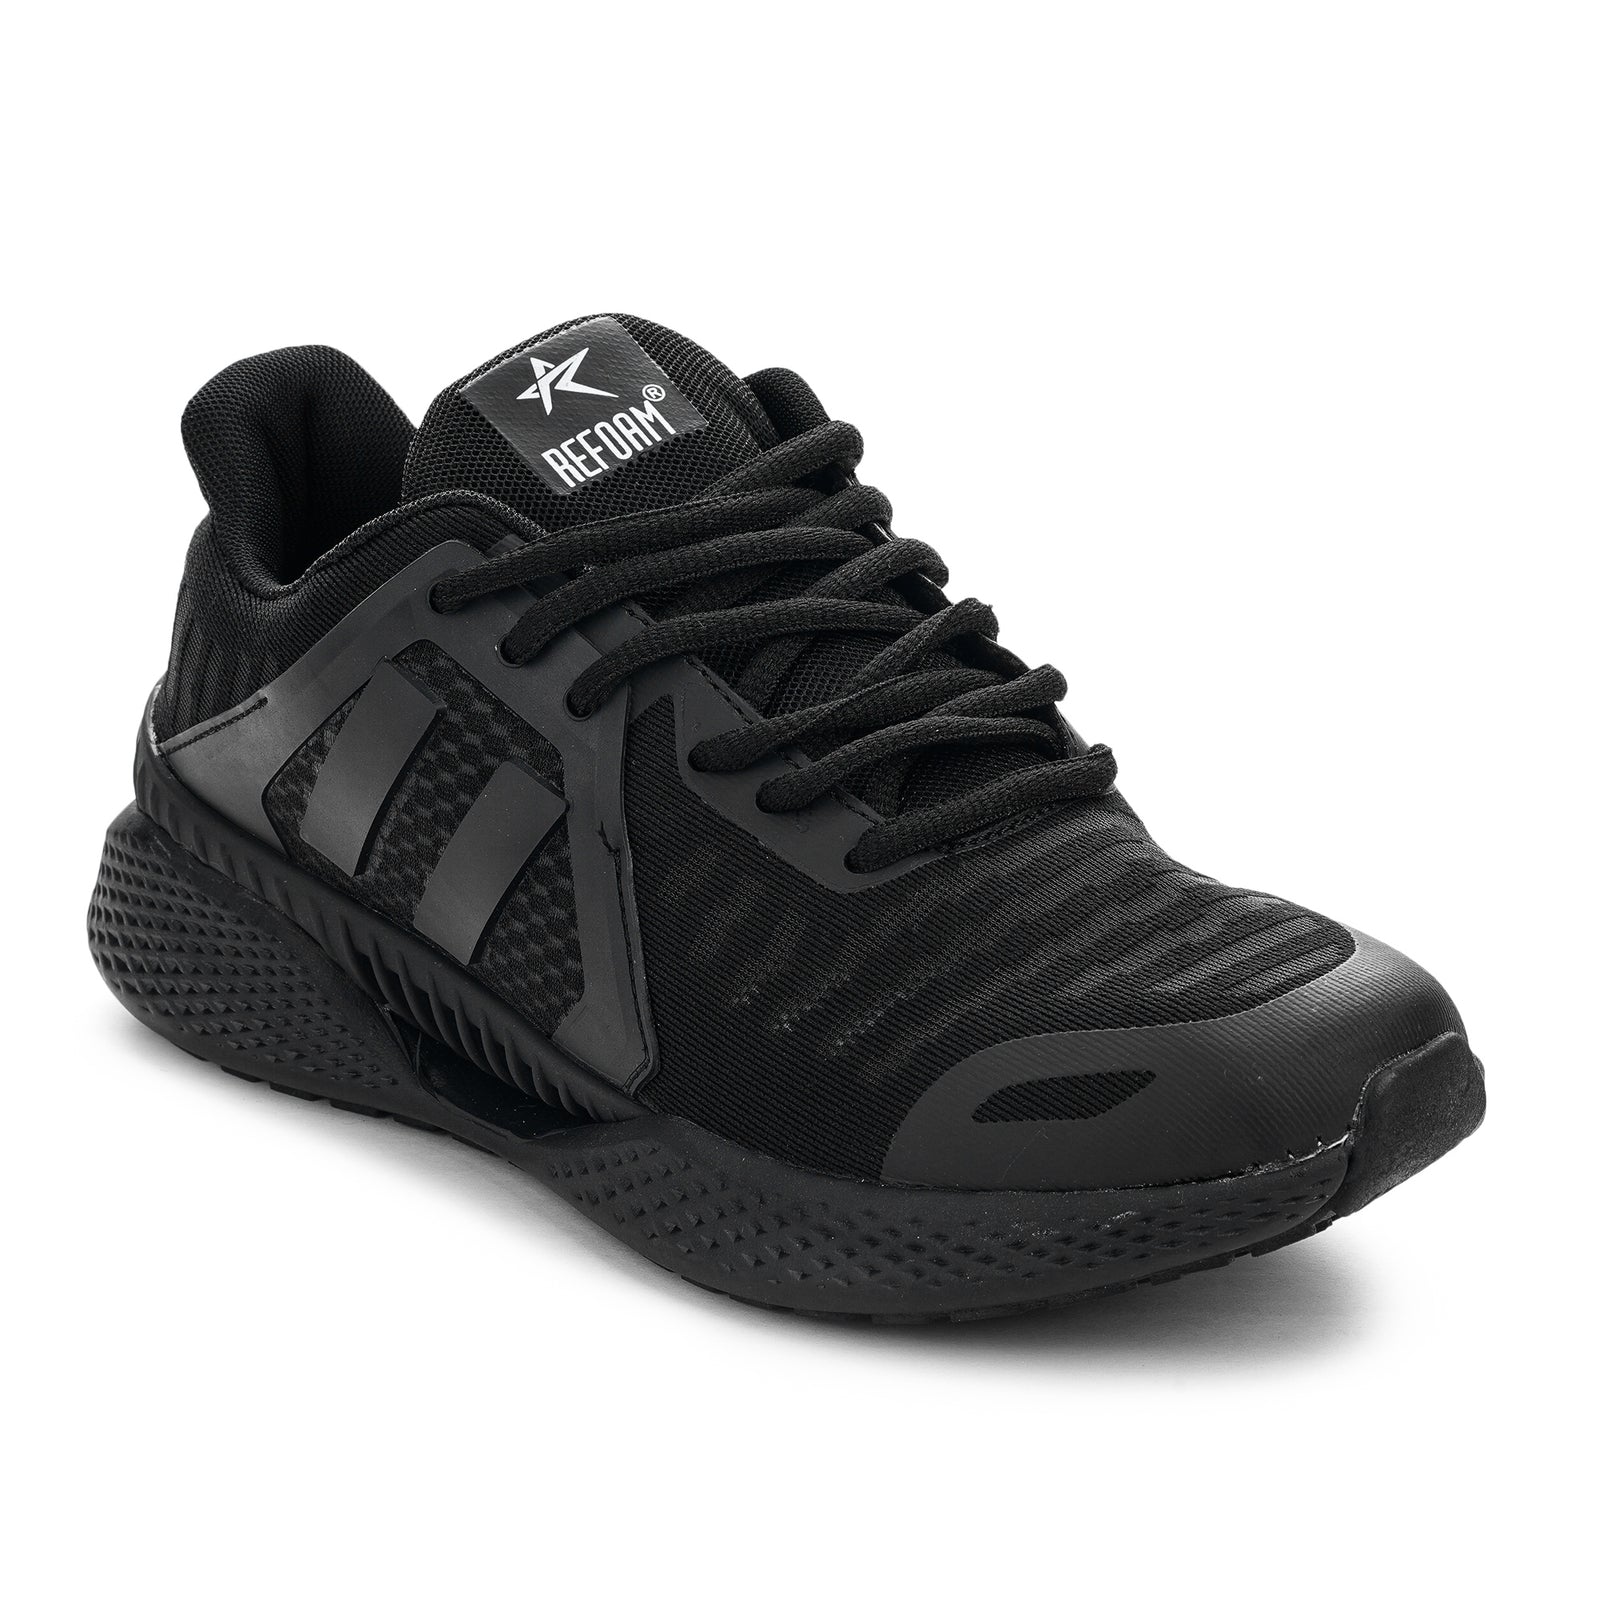 Black Solid Mesh Lace Up Sneakers For Men